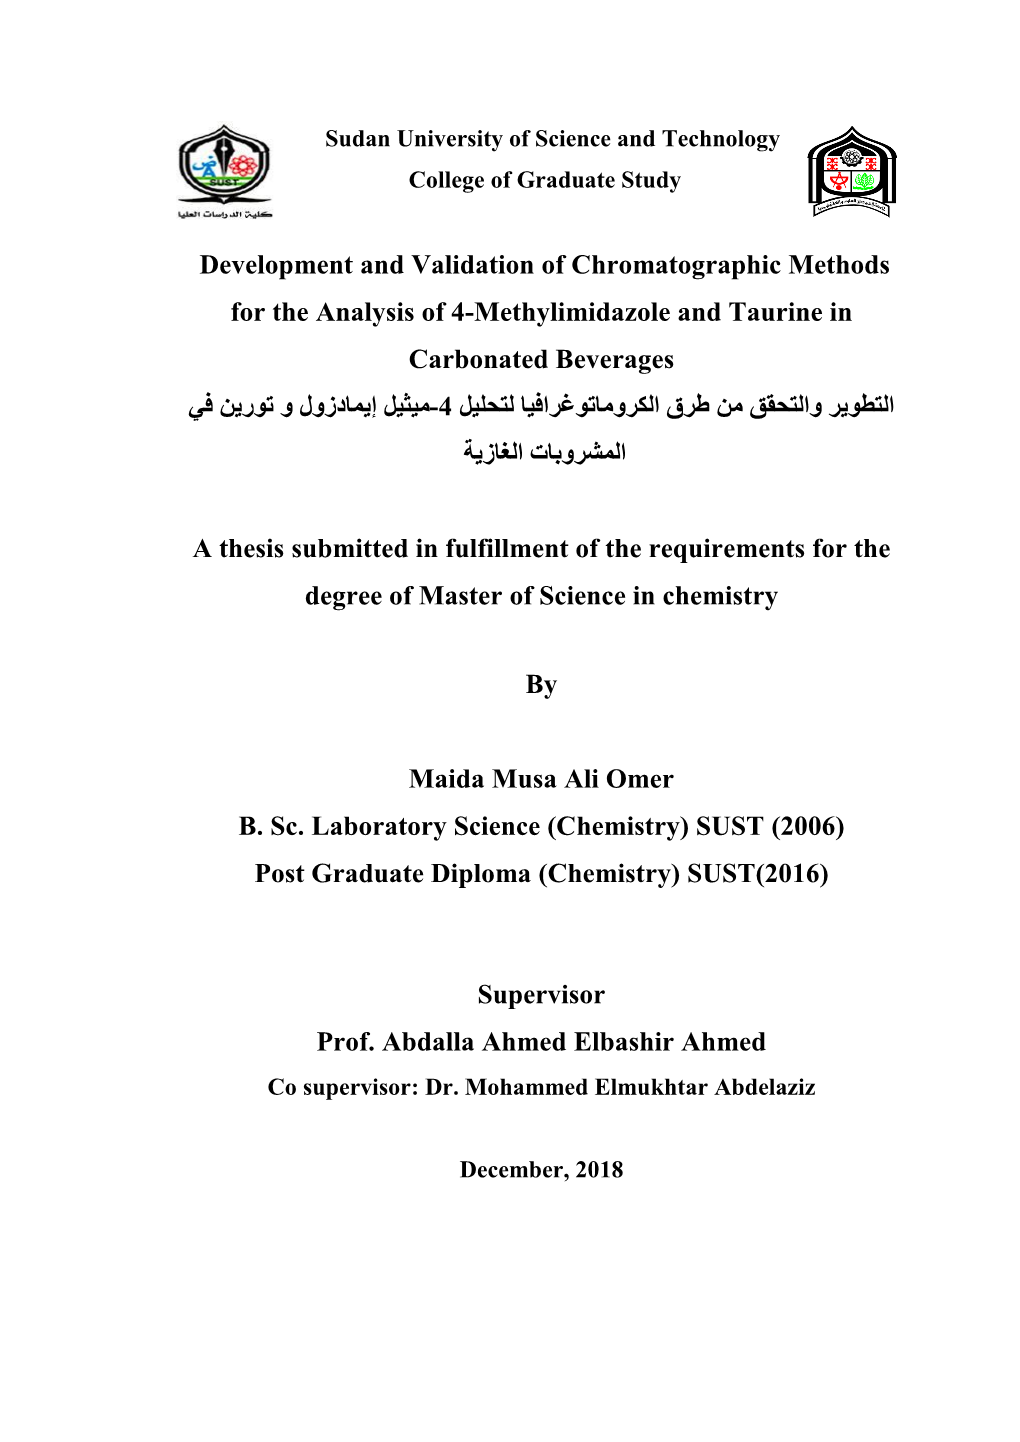 Development and Validation of Chromatographic Methods for The